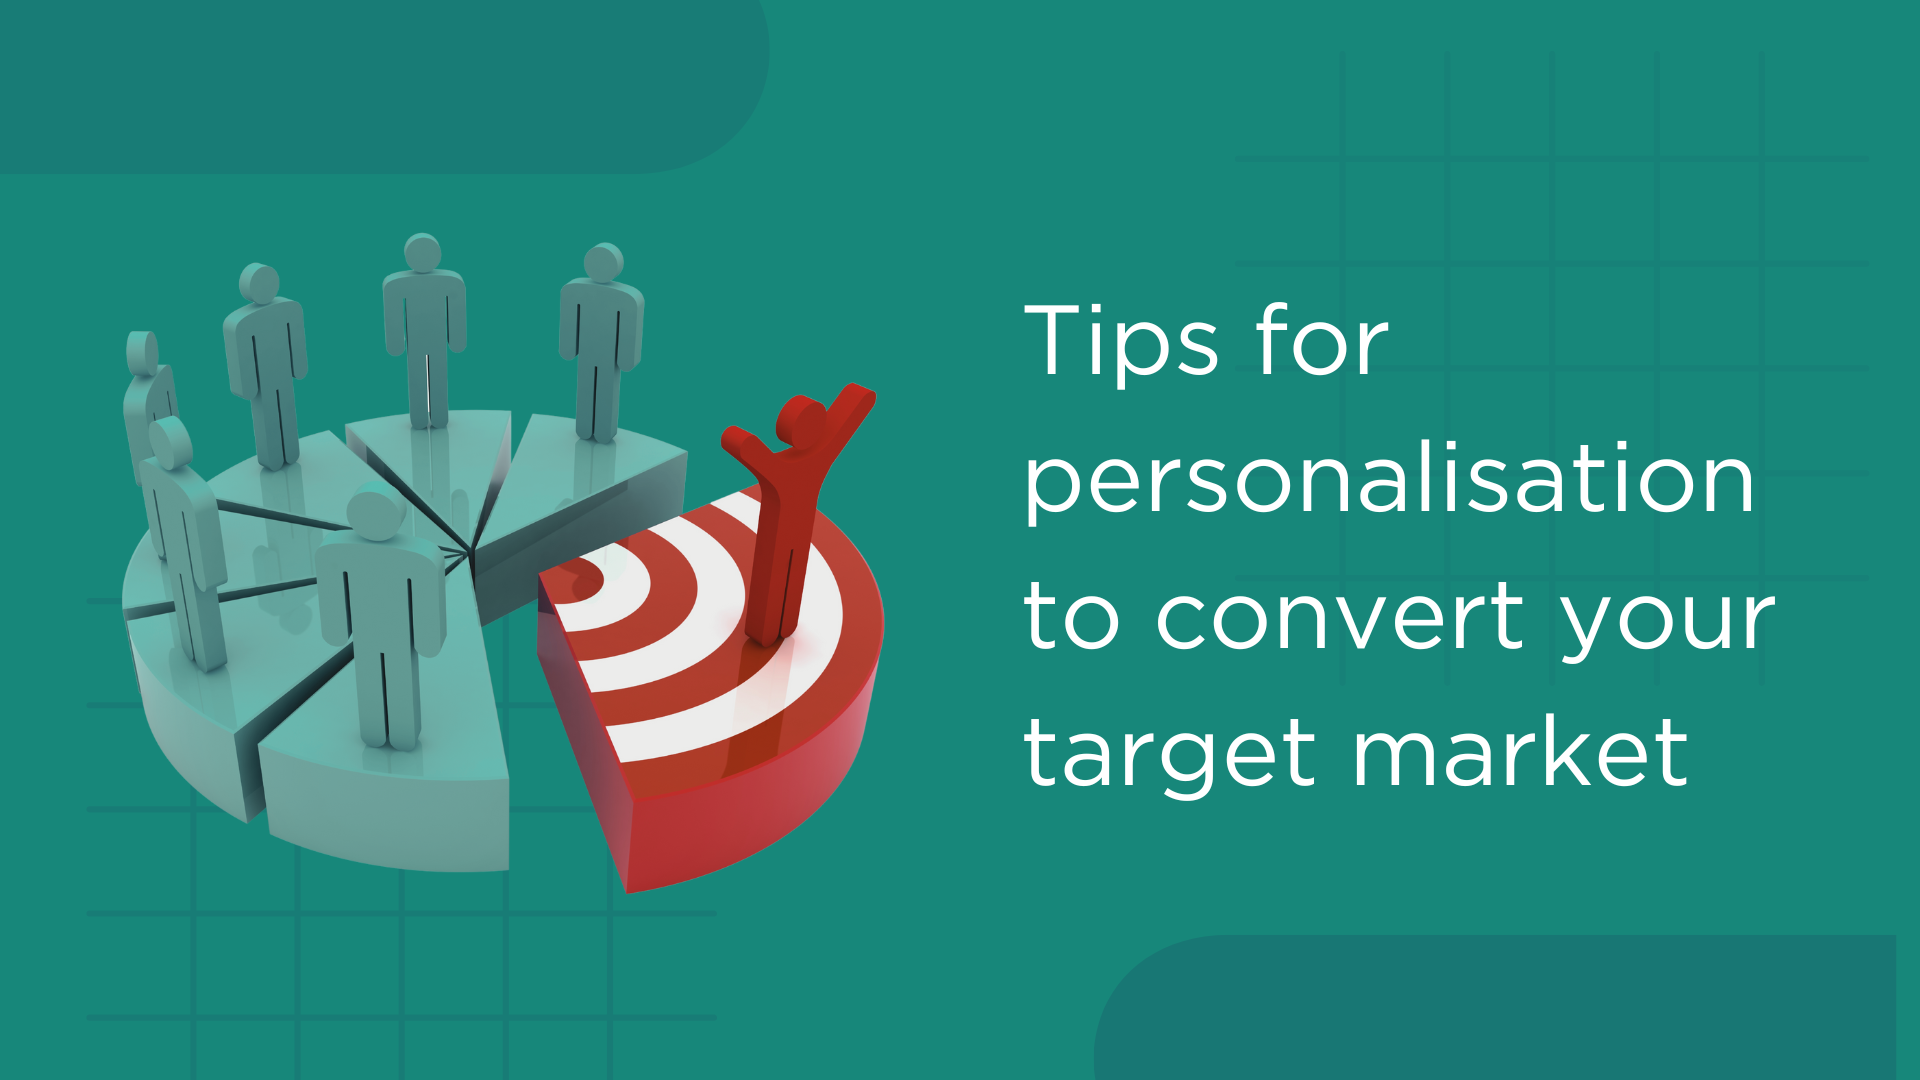 Tips for personalisation to convert your target market